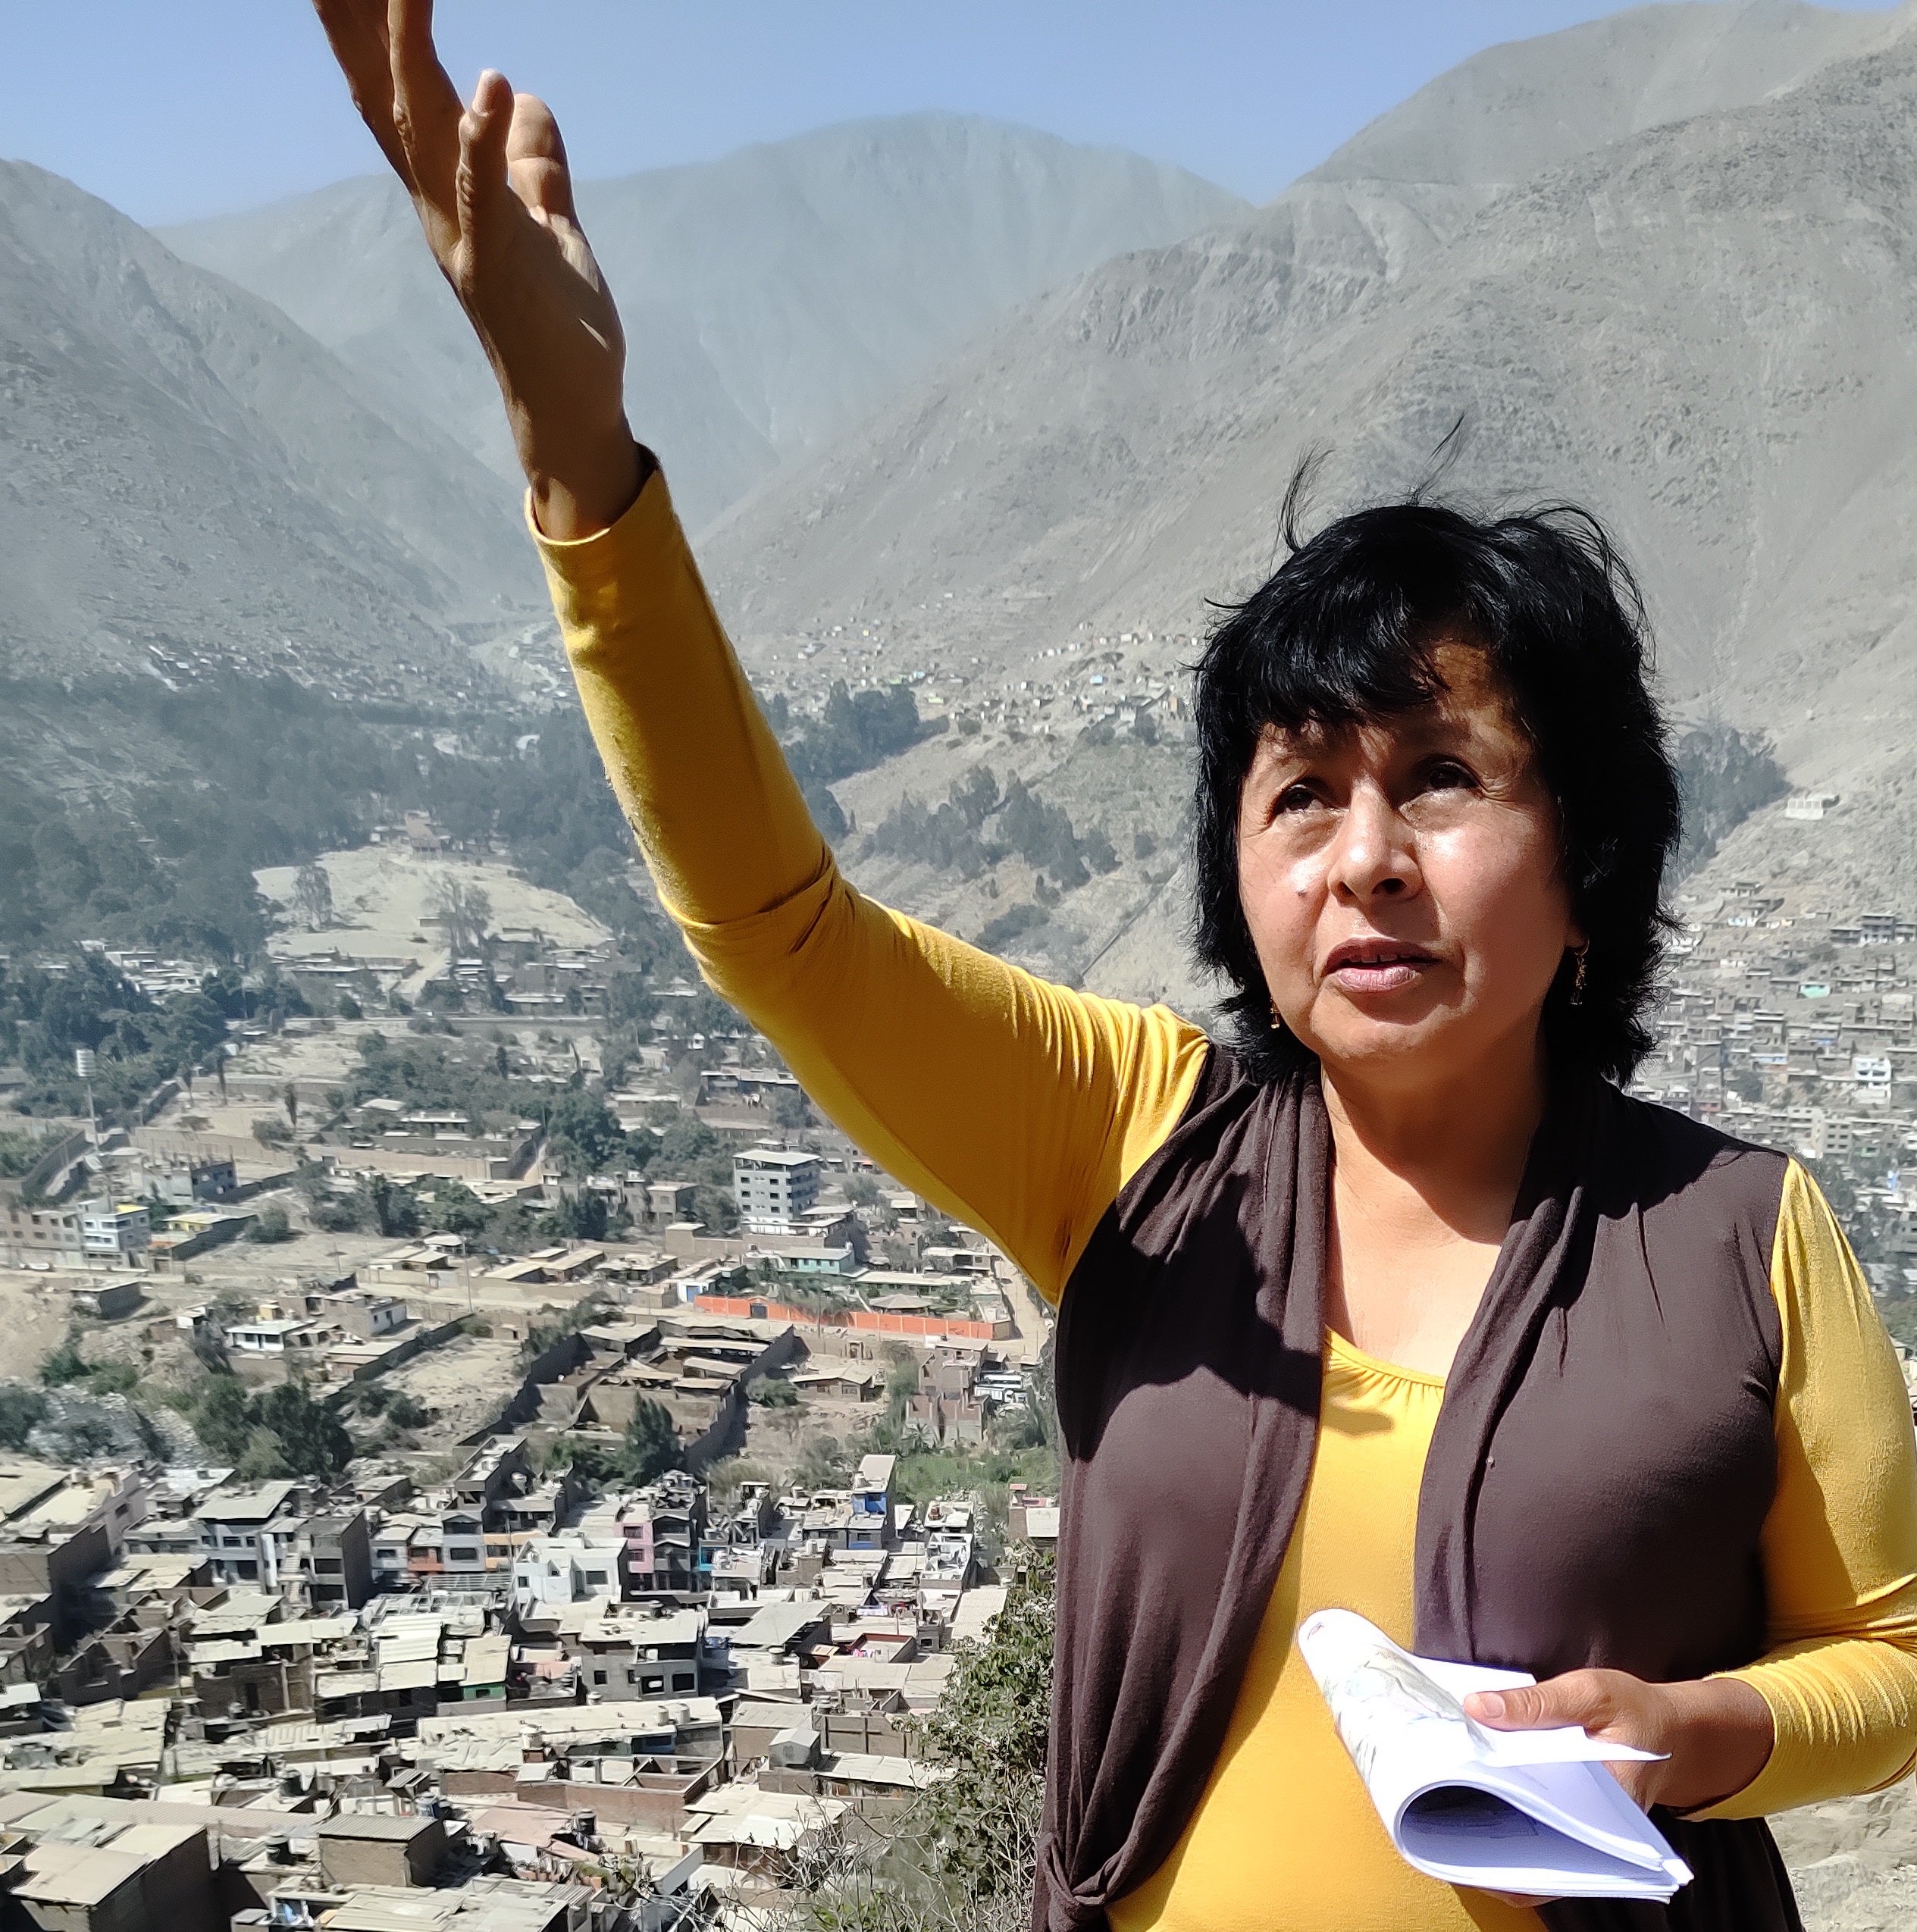 Eva Luiz Davalos, 49, a psychologist who works with communities in the Chosica Valley